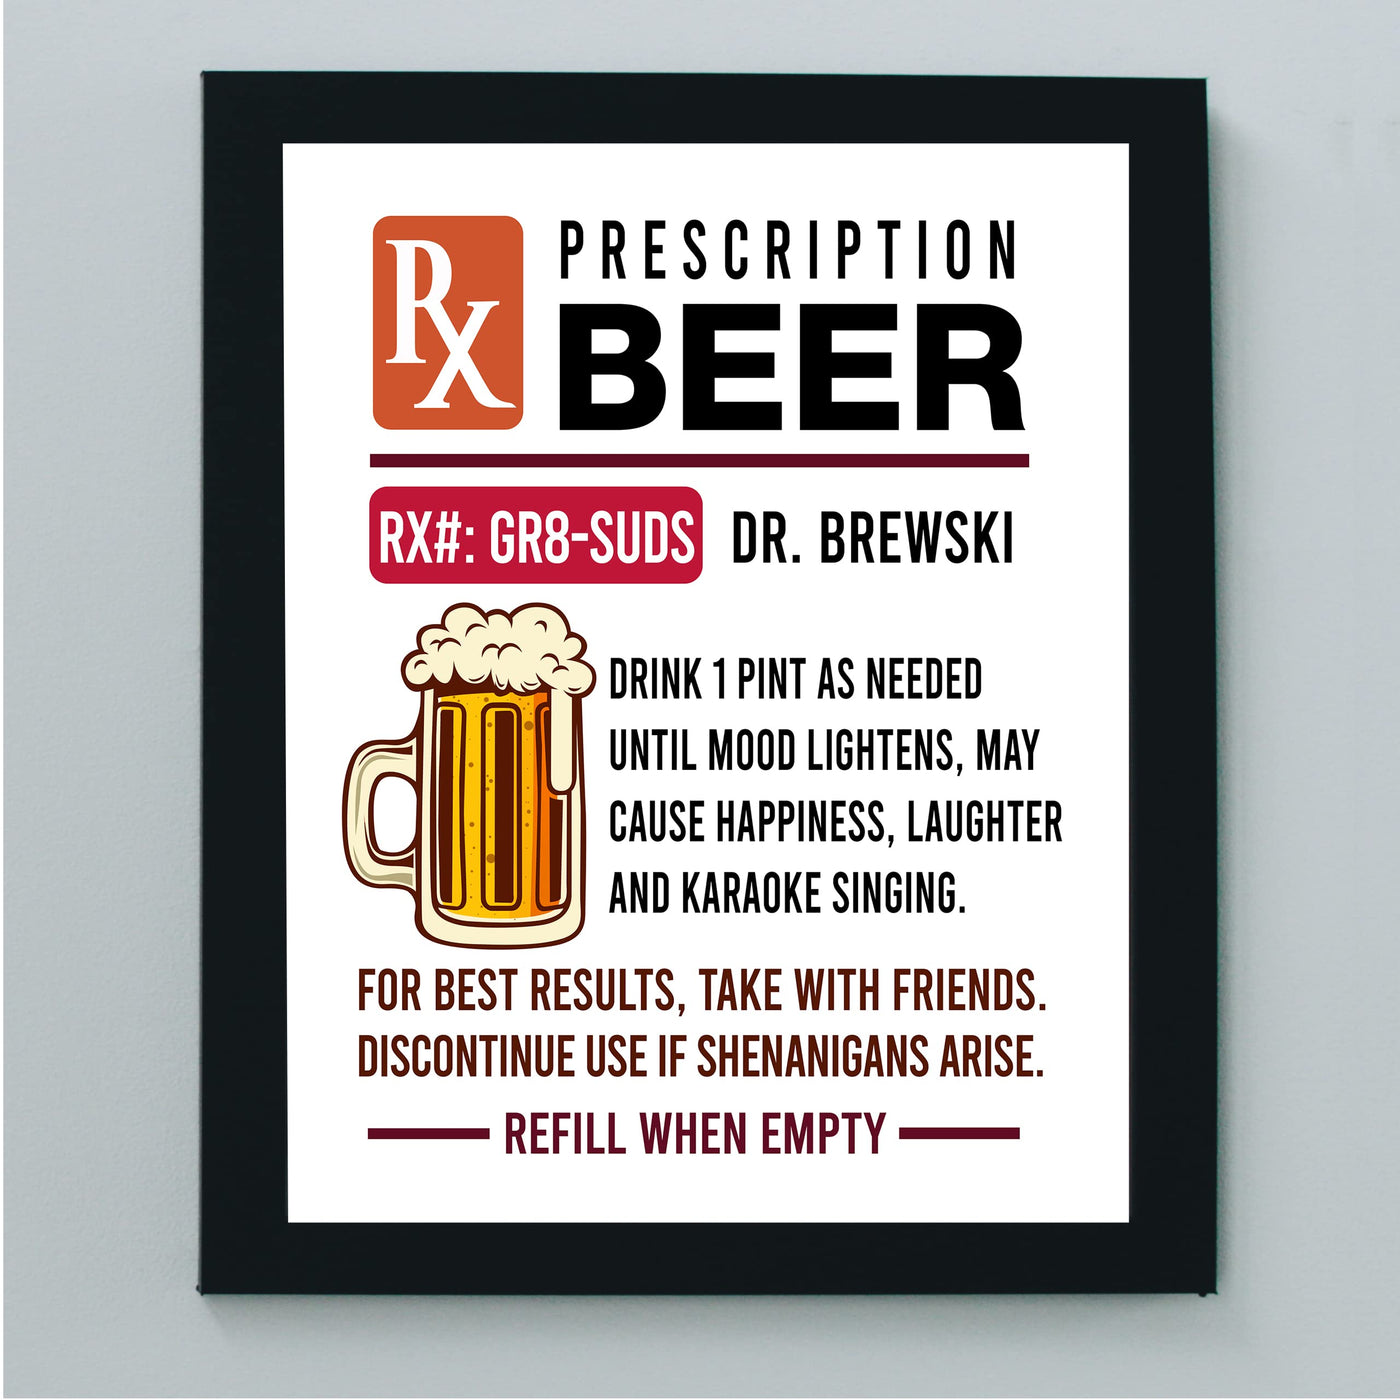 Prescription Beer -Dr. Brewski Funny Beer & Alcohol Wall Sign -8 x 10" Rustic Bar Wall Art Print -Ready to Frame. Retro Home-Patio-Garage-Shop-Pub Decor. Fun Man Cave Decoration for Drinkers!